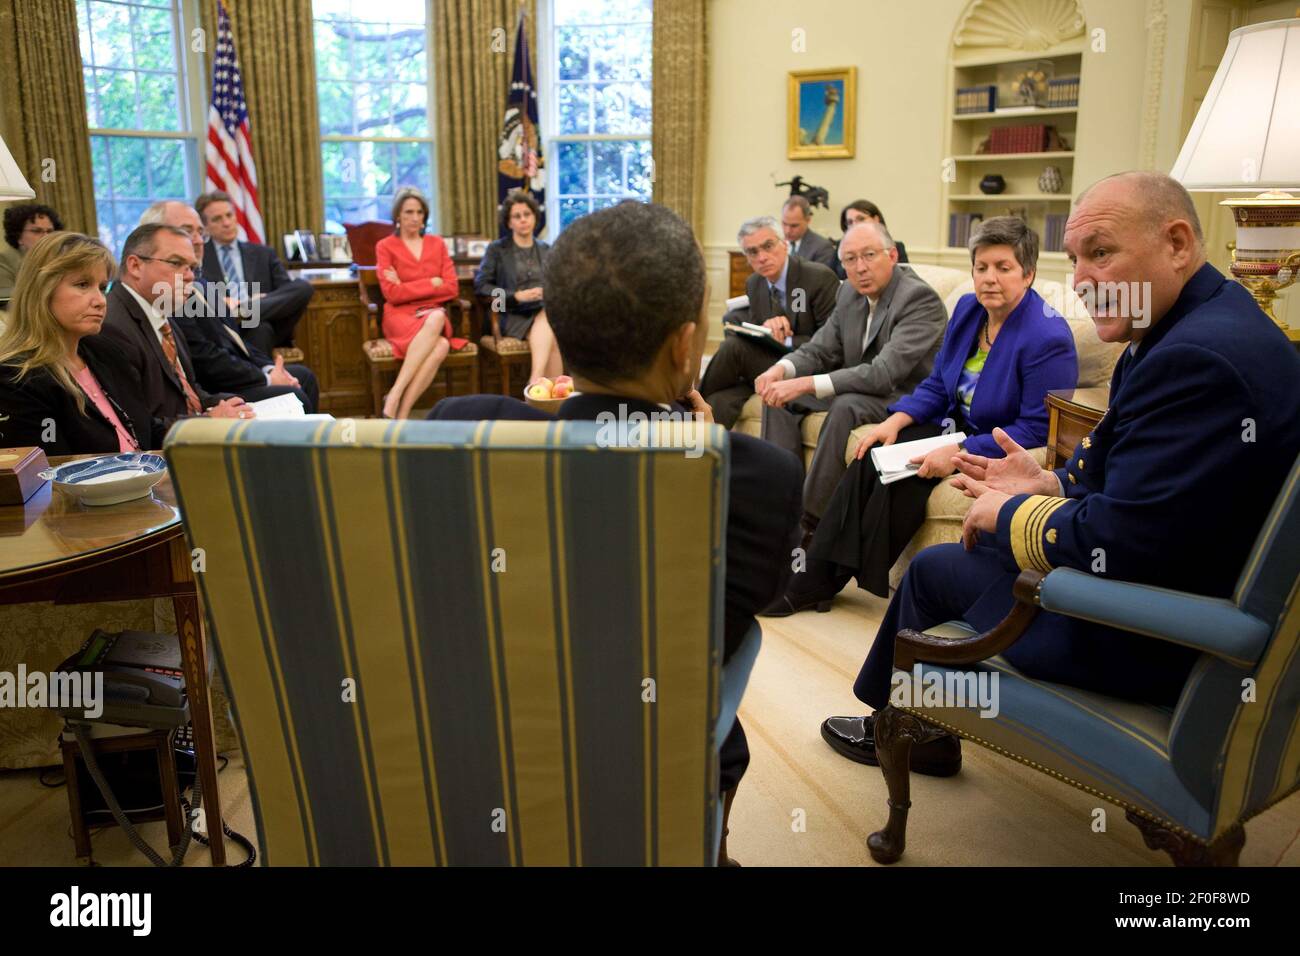 22 April 2010 - Washington, D.C- President Barack Obama meets with Admiral Thad W. Allen, Commandant of the United States Coast Guard, and other administration officials in the Oval Office, April 22, 2010, regarding the situation in the Gulf of Mexico. Photo Credit: Pete Souza / White House/Sipa Press This official White House photograph is being made available only for publication by news organizations and/or for personal use printing by the subject(s) of the photograph. The photograph may not be manipulated in any way and may not be used in commercial or political materials, advertisements,  Stock Photo